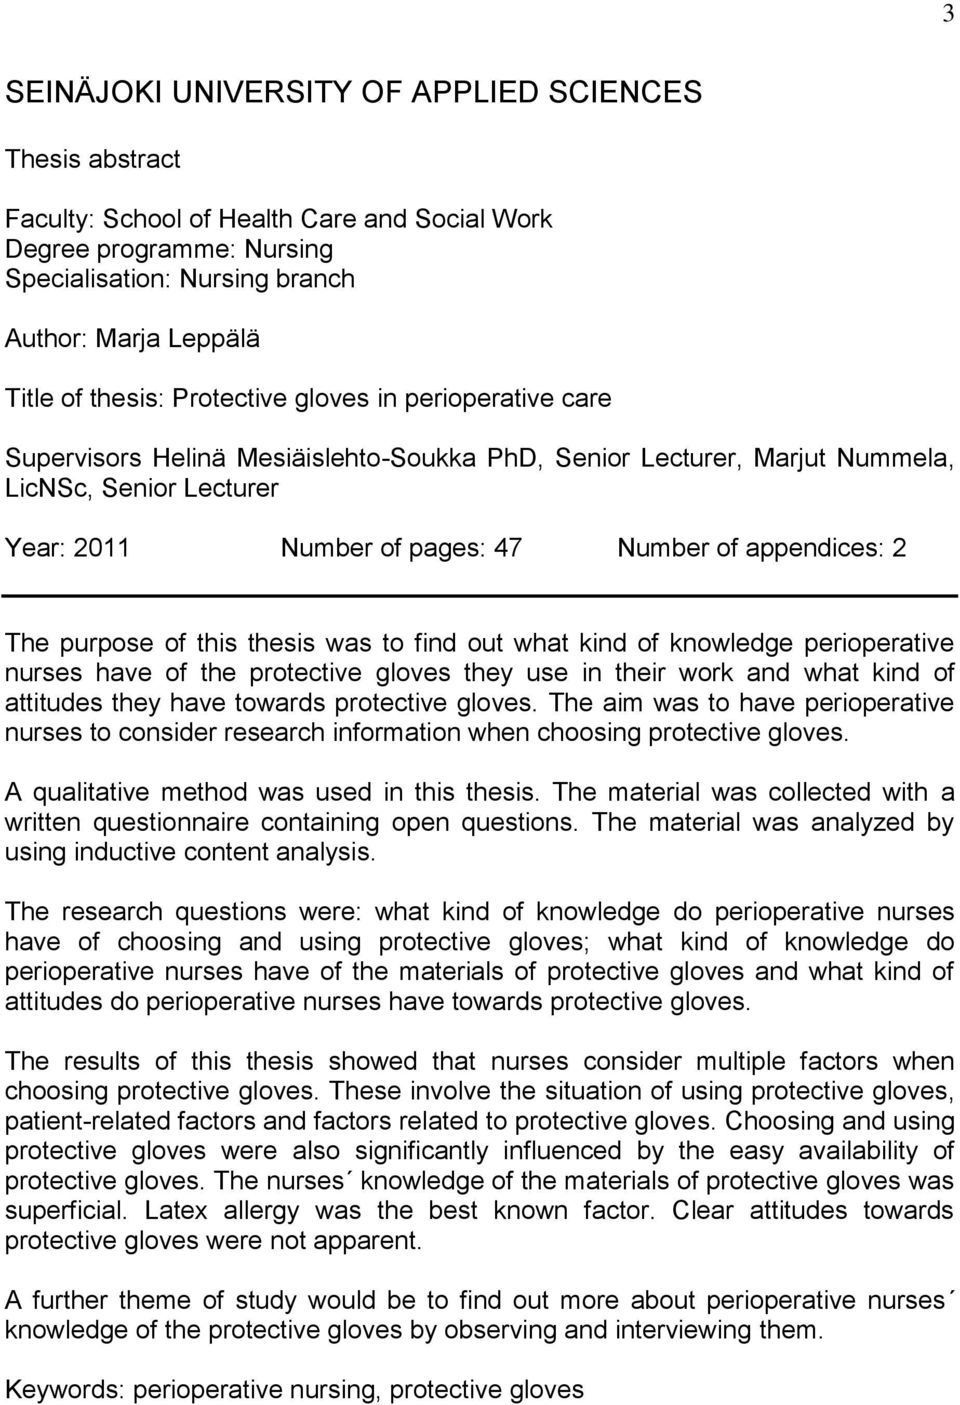 appendices: 2 The purpose of this thesis was to find out what kind of knowledge perioperative nurses have of the protective gloves they use in their work and what kind of attitudes they have towards